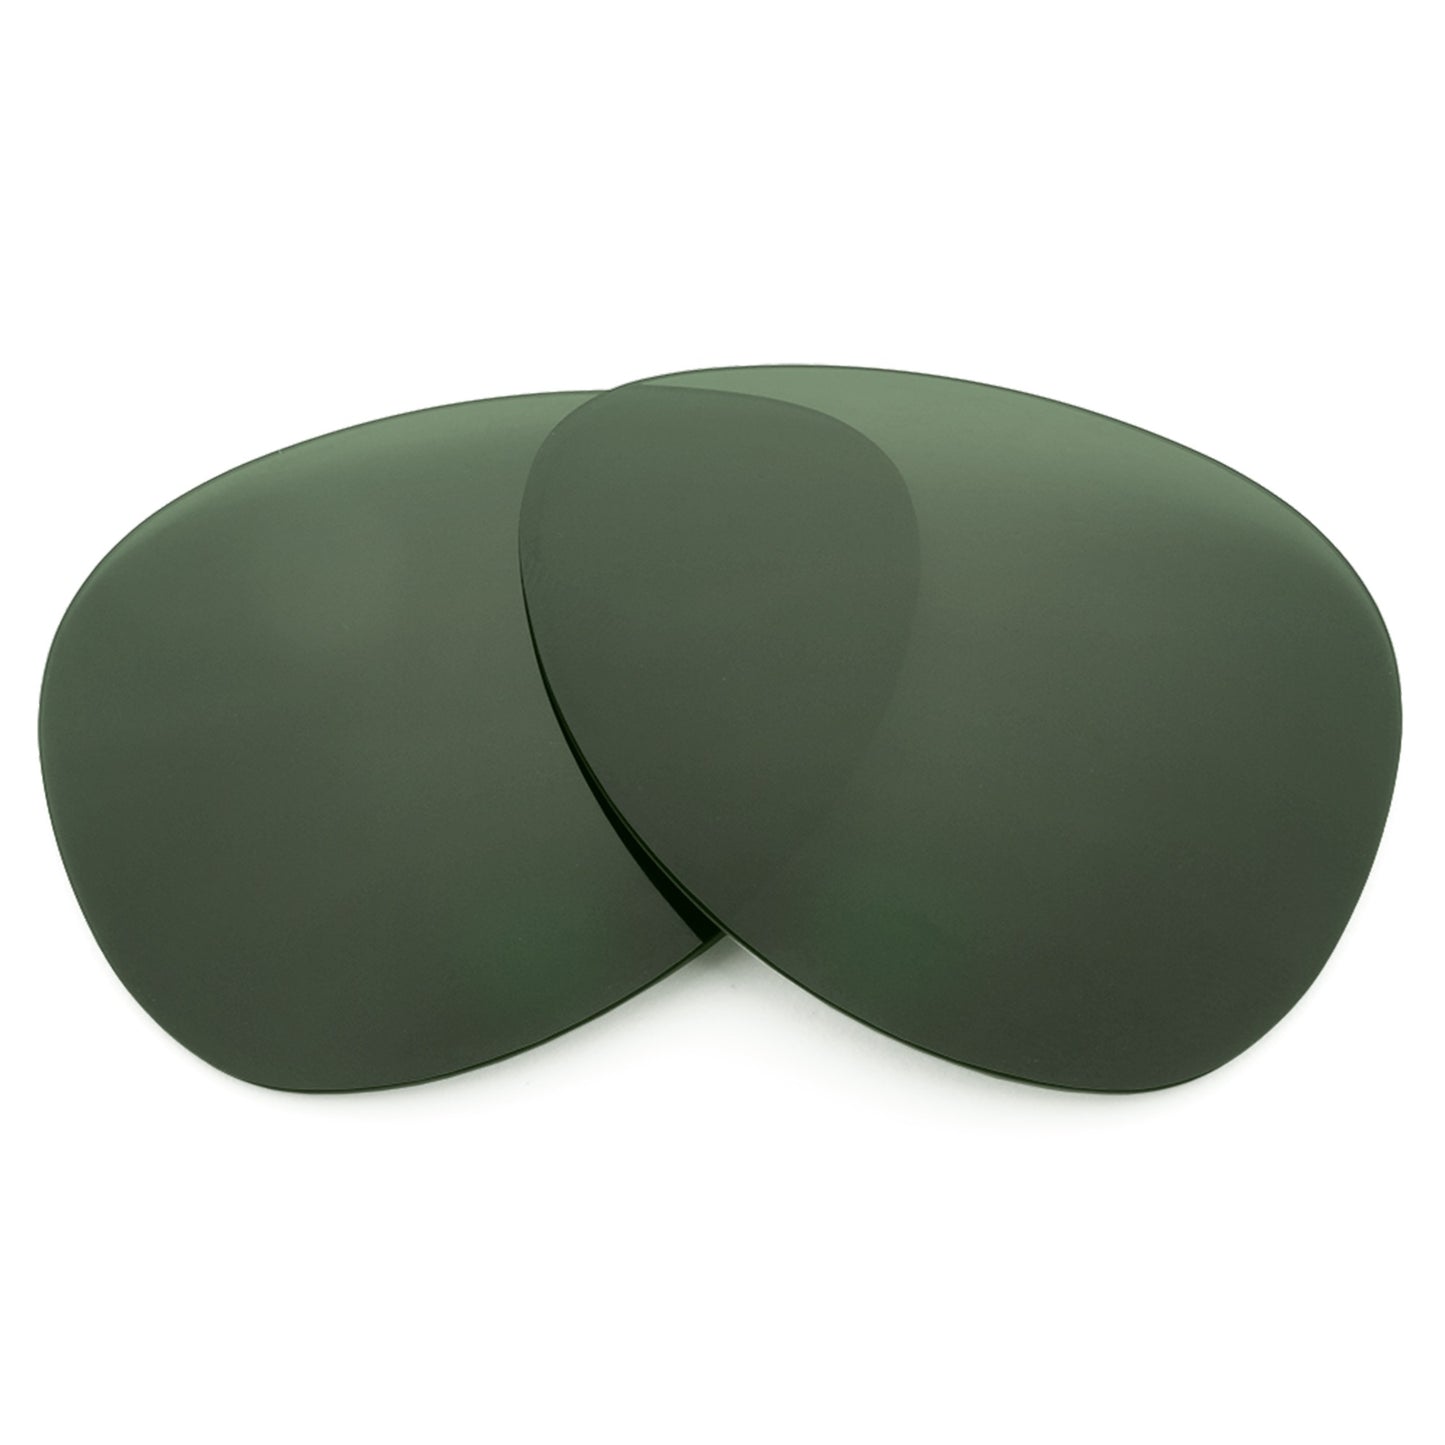 Revant replacement lenses for Ray-Ban RB3533 57mm Elite Polarized Gray Green